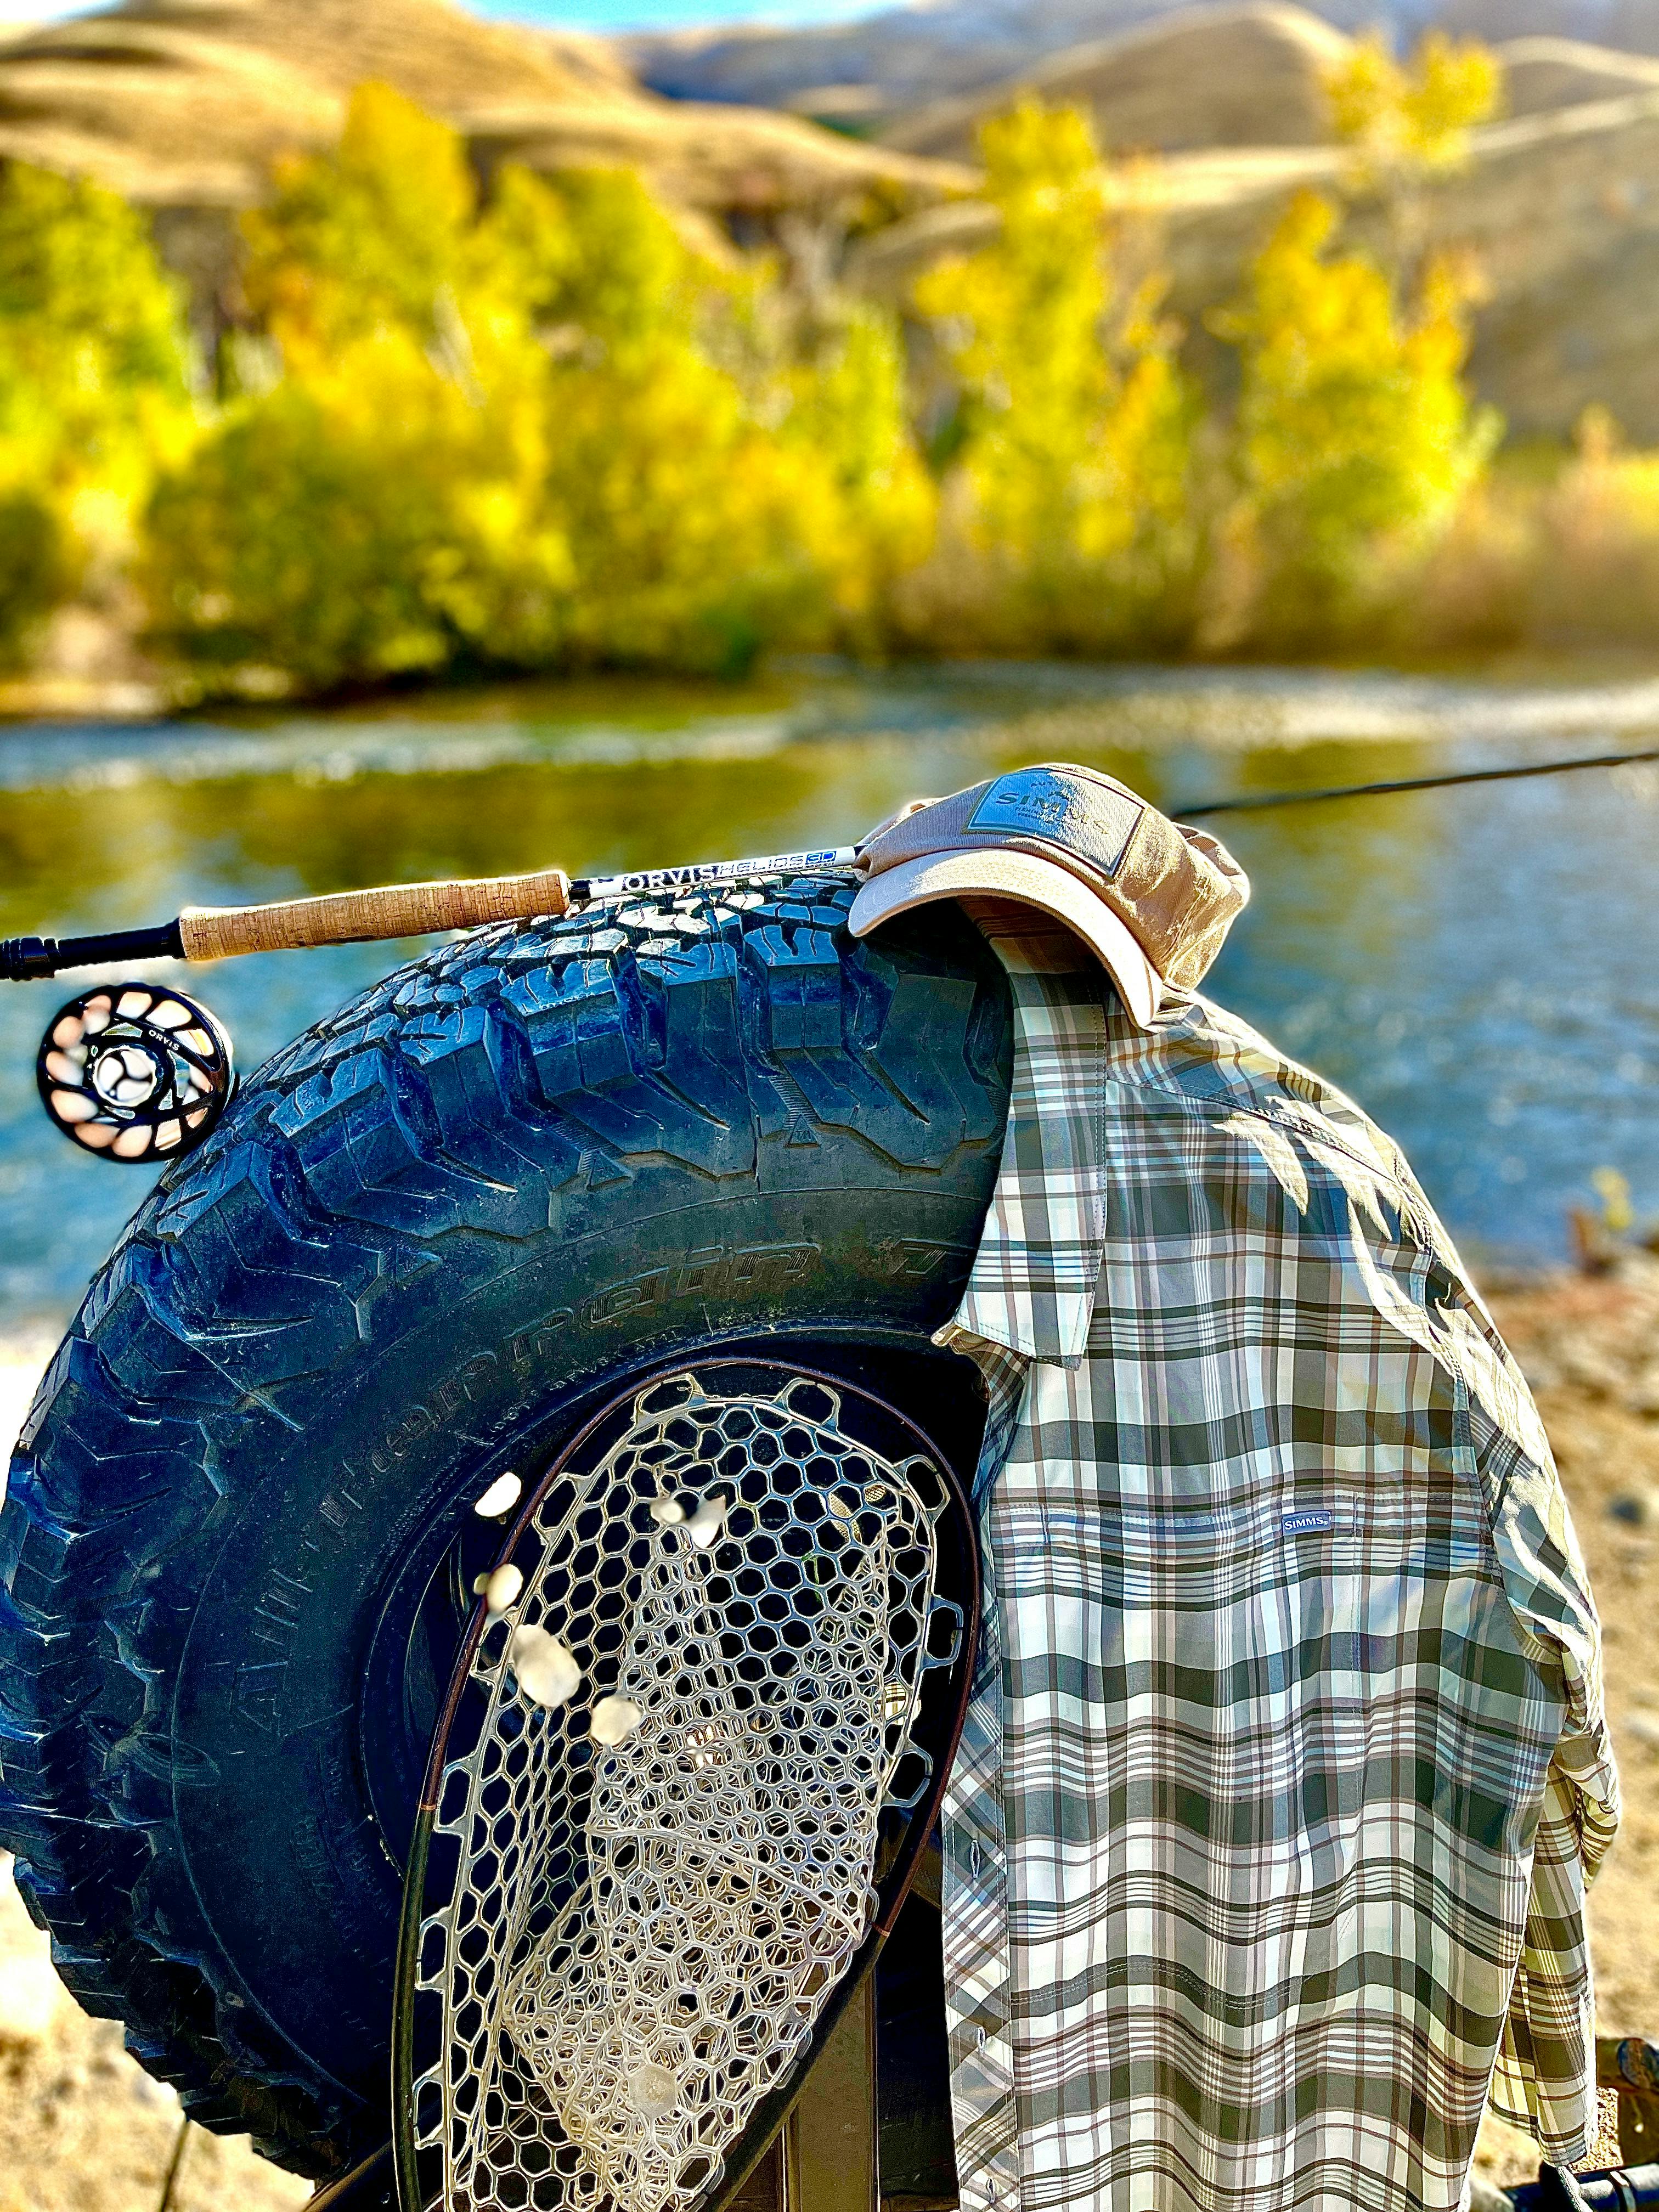 The Simms Stone Cold Shirt hanging on a tire with a fly rod and net next to it. 